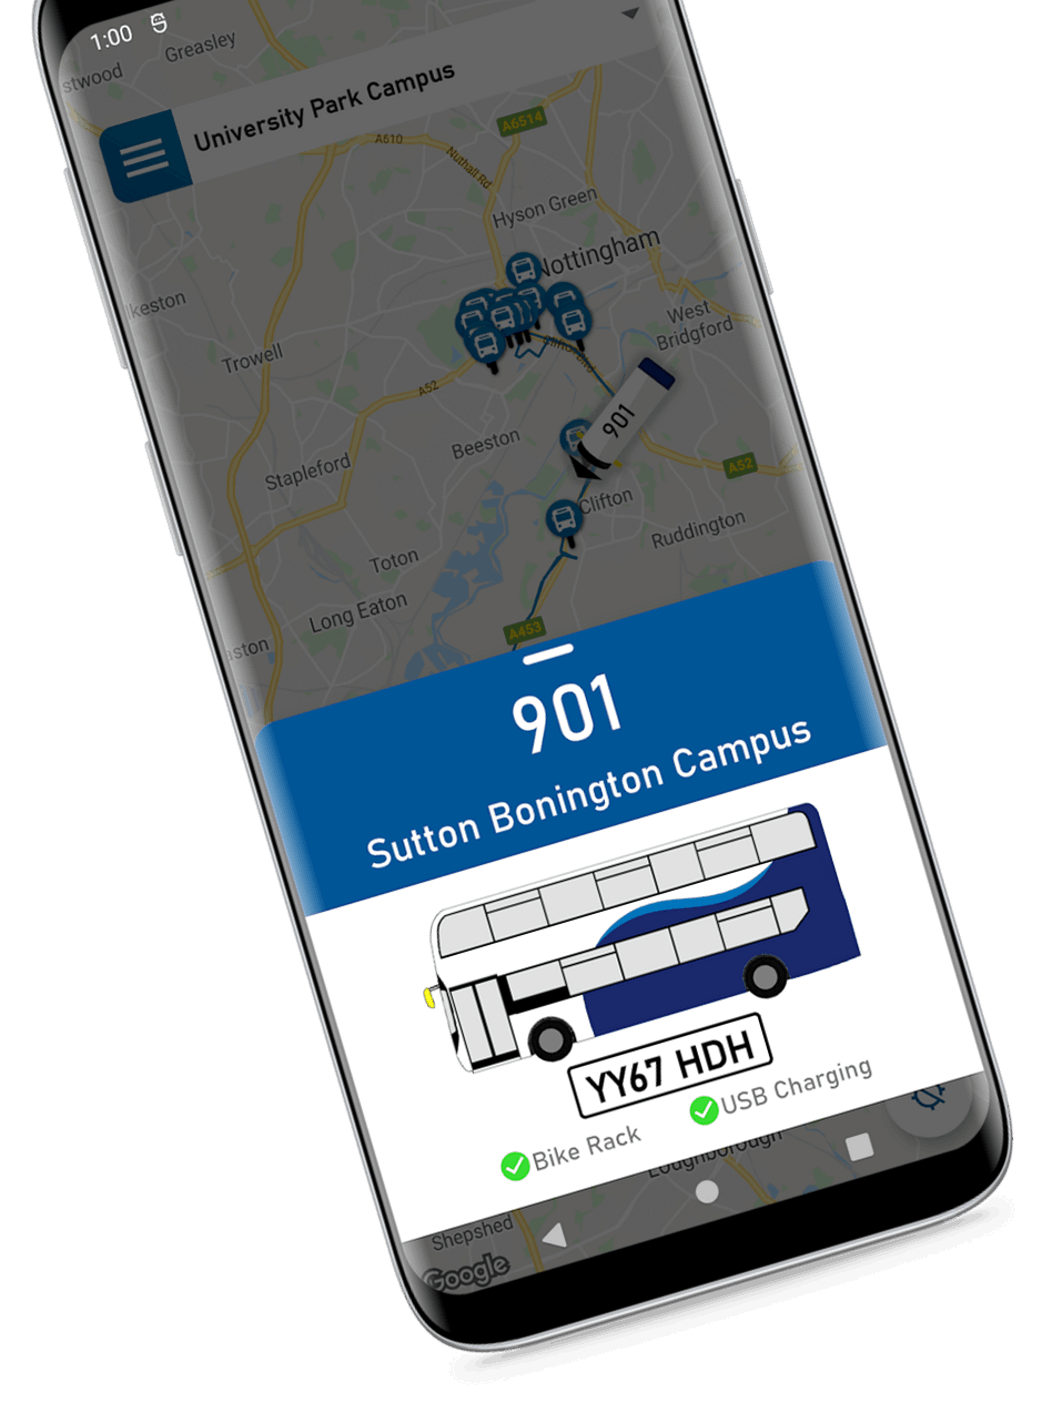 App screen showing the live GPS Vehicle tracker